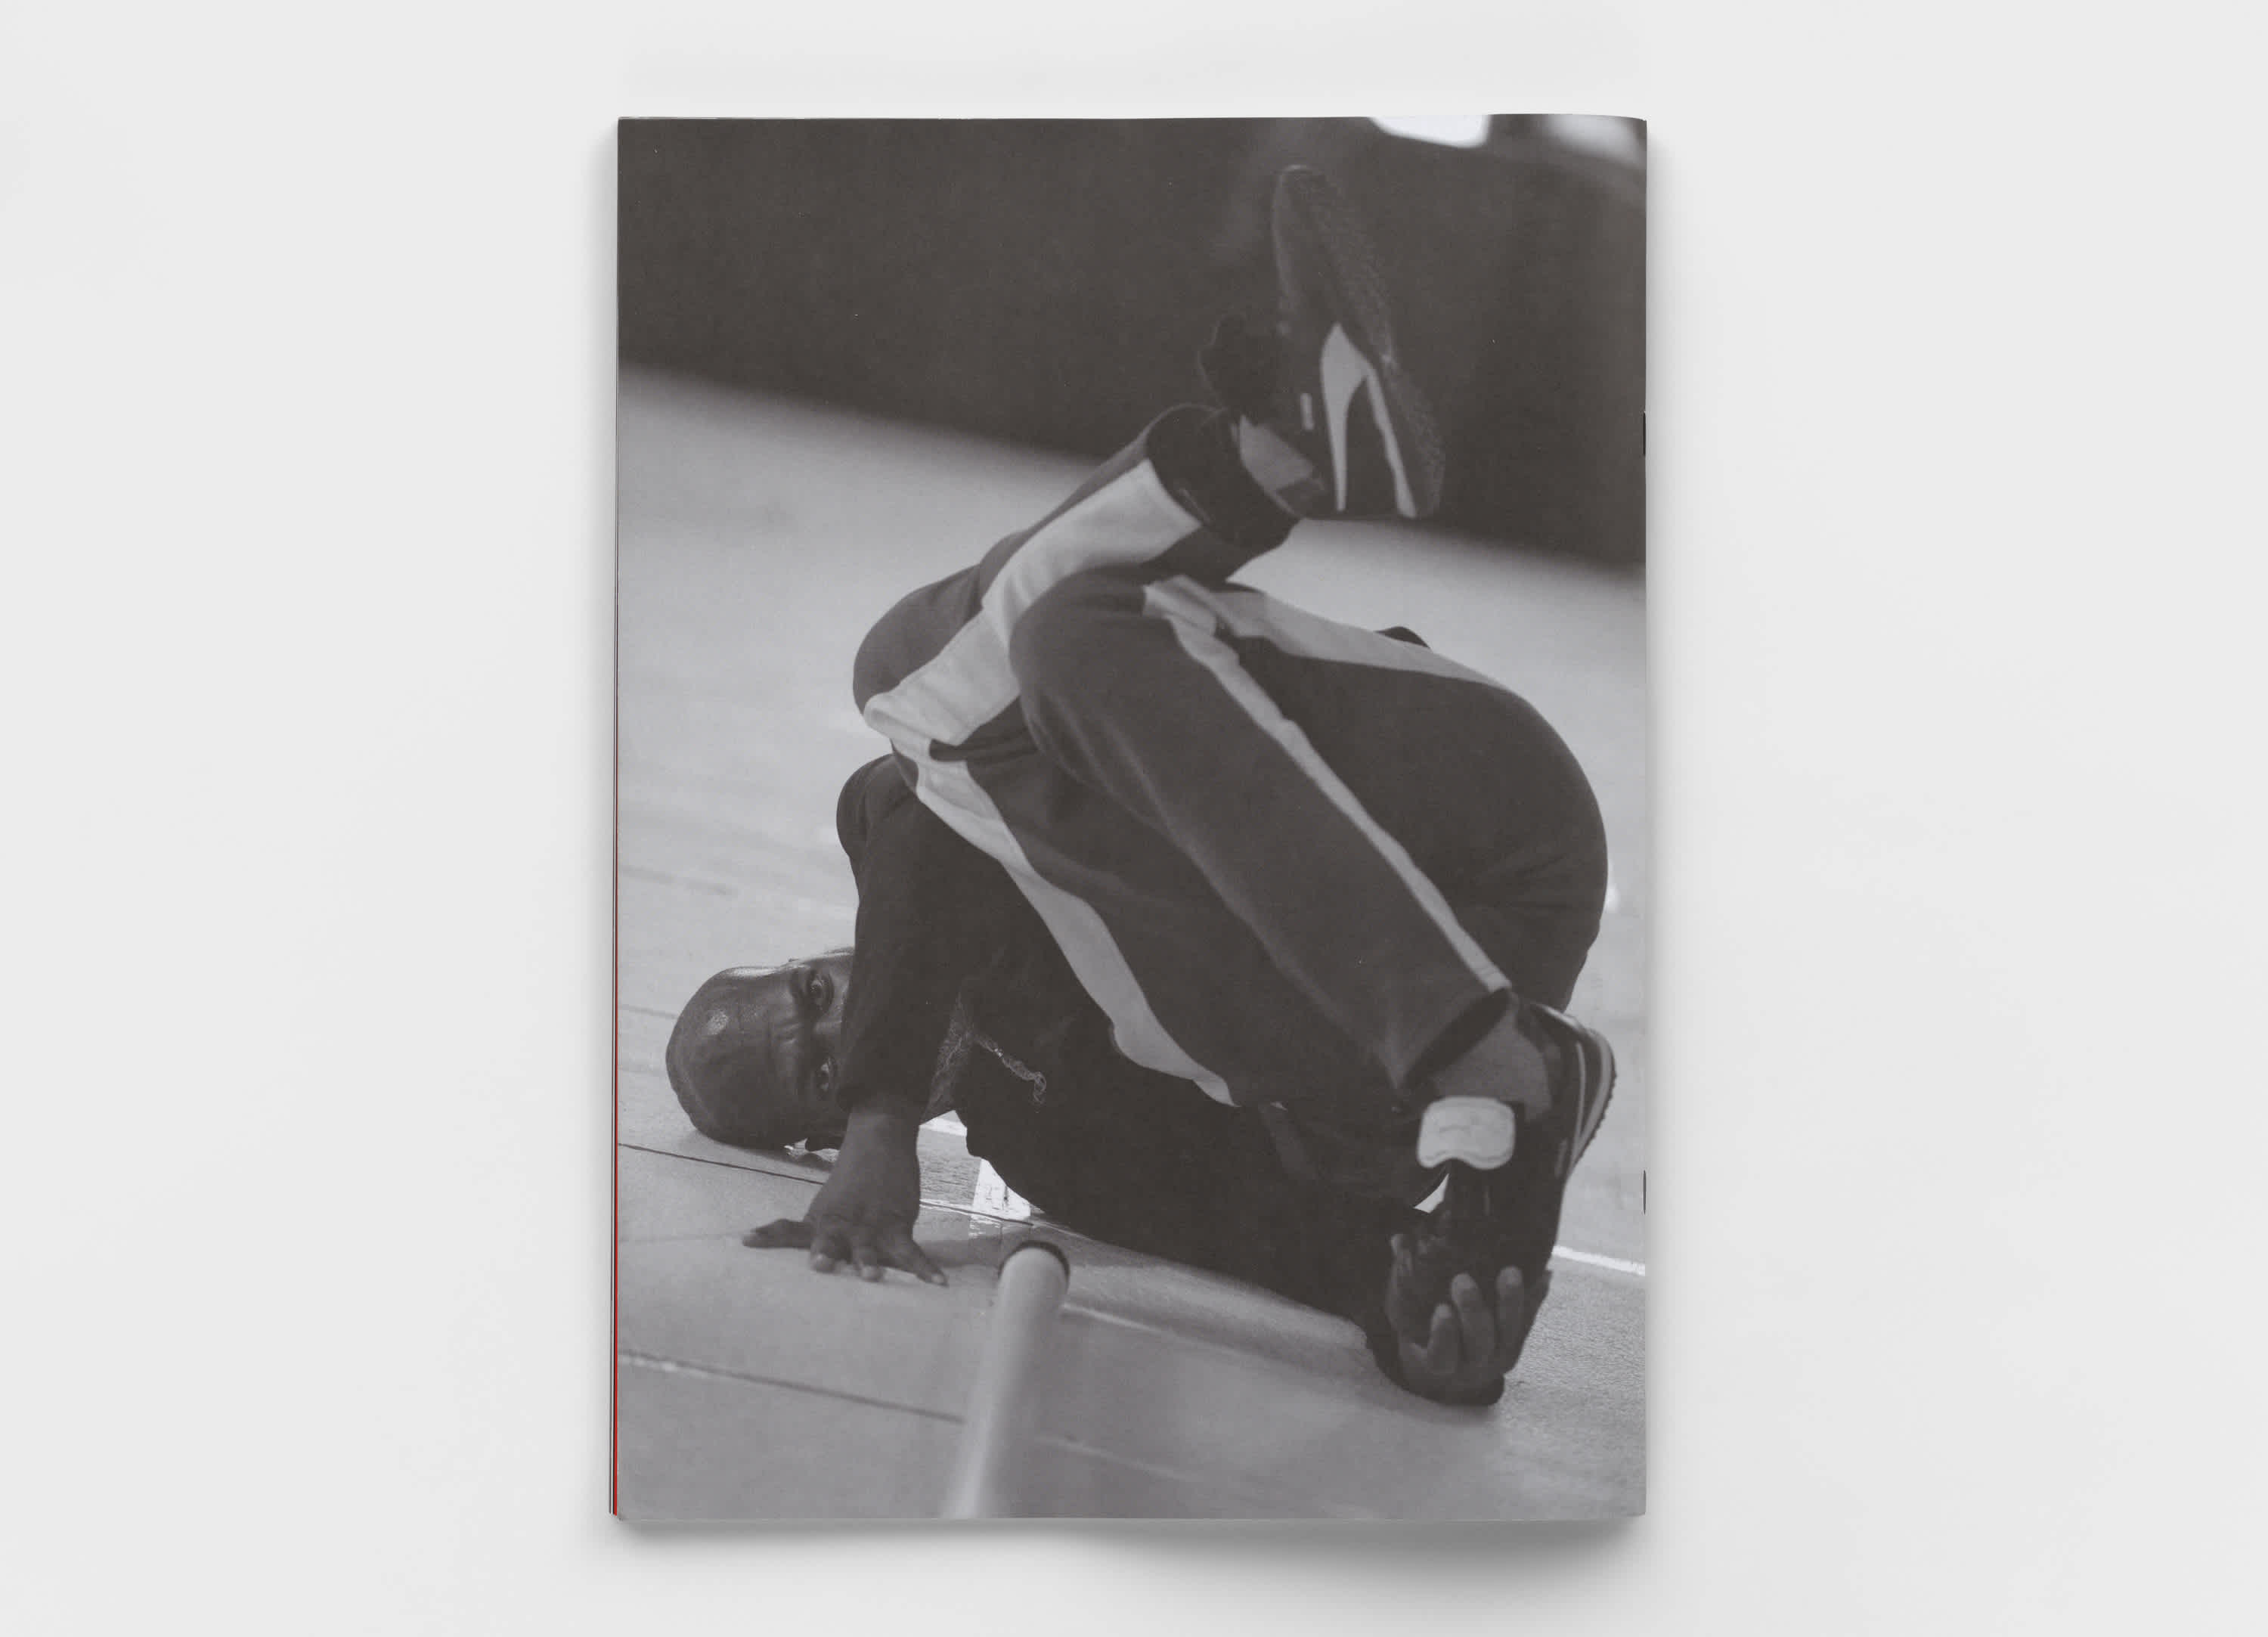 Back cover of a book in which a man in a track suit is bent into a precarious position on the floor, presumably dancing. The image is black and white. The book is on top of a light gray background.